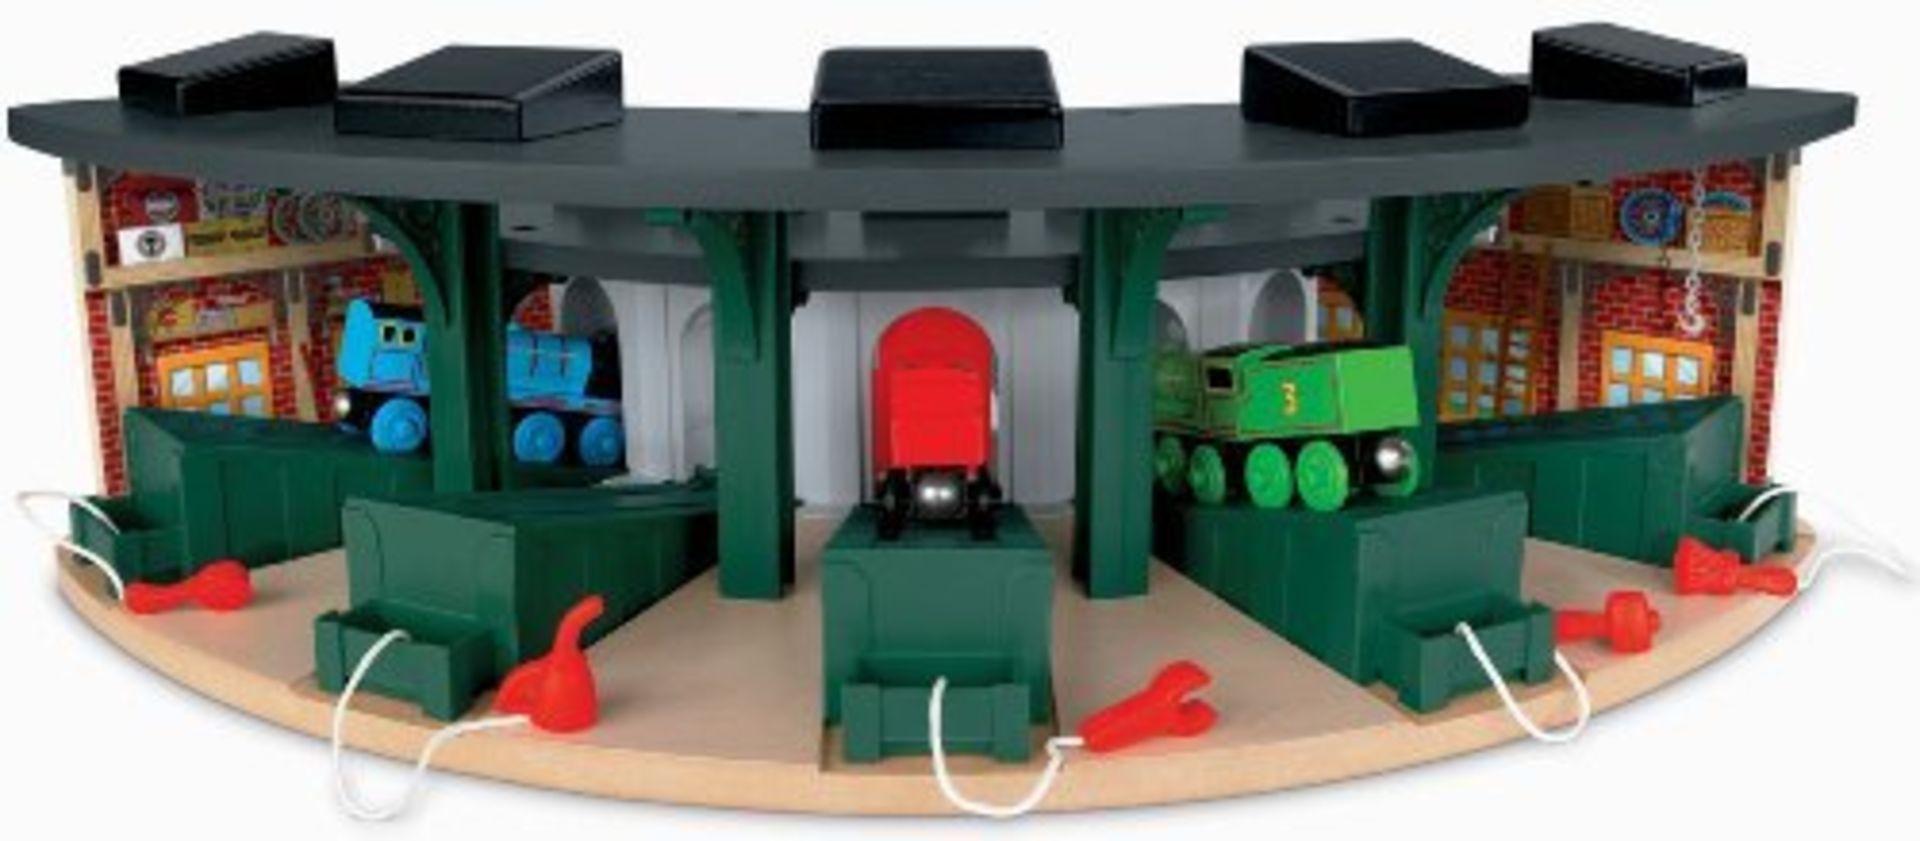 2 x THOMAS WOODEN RAILWAY-DELUXE ROUNDHOUSE | 746775214845 | RRP £ 180 DAMAGED PACKAGING - Image 2 of 3